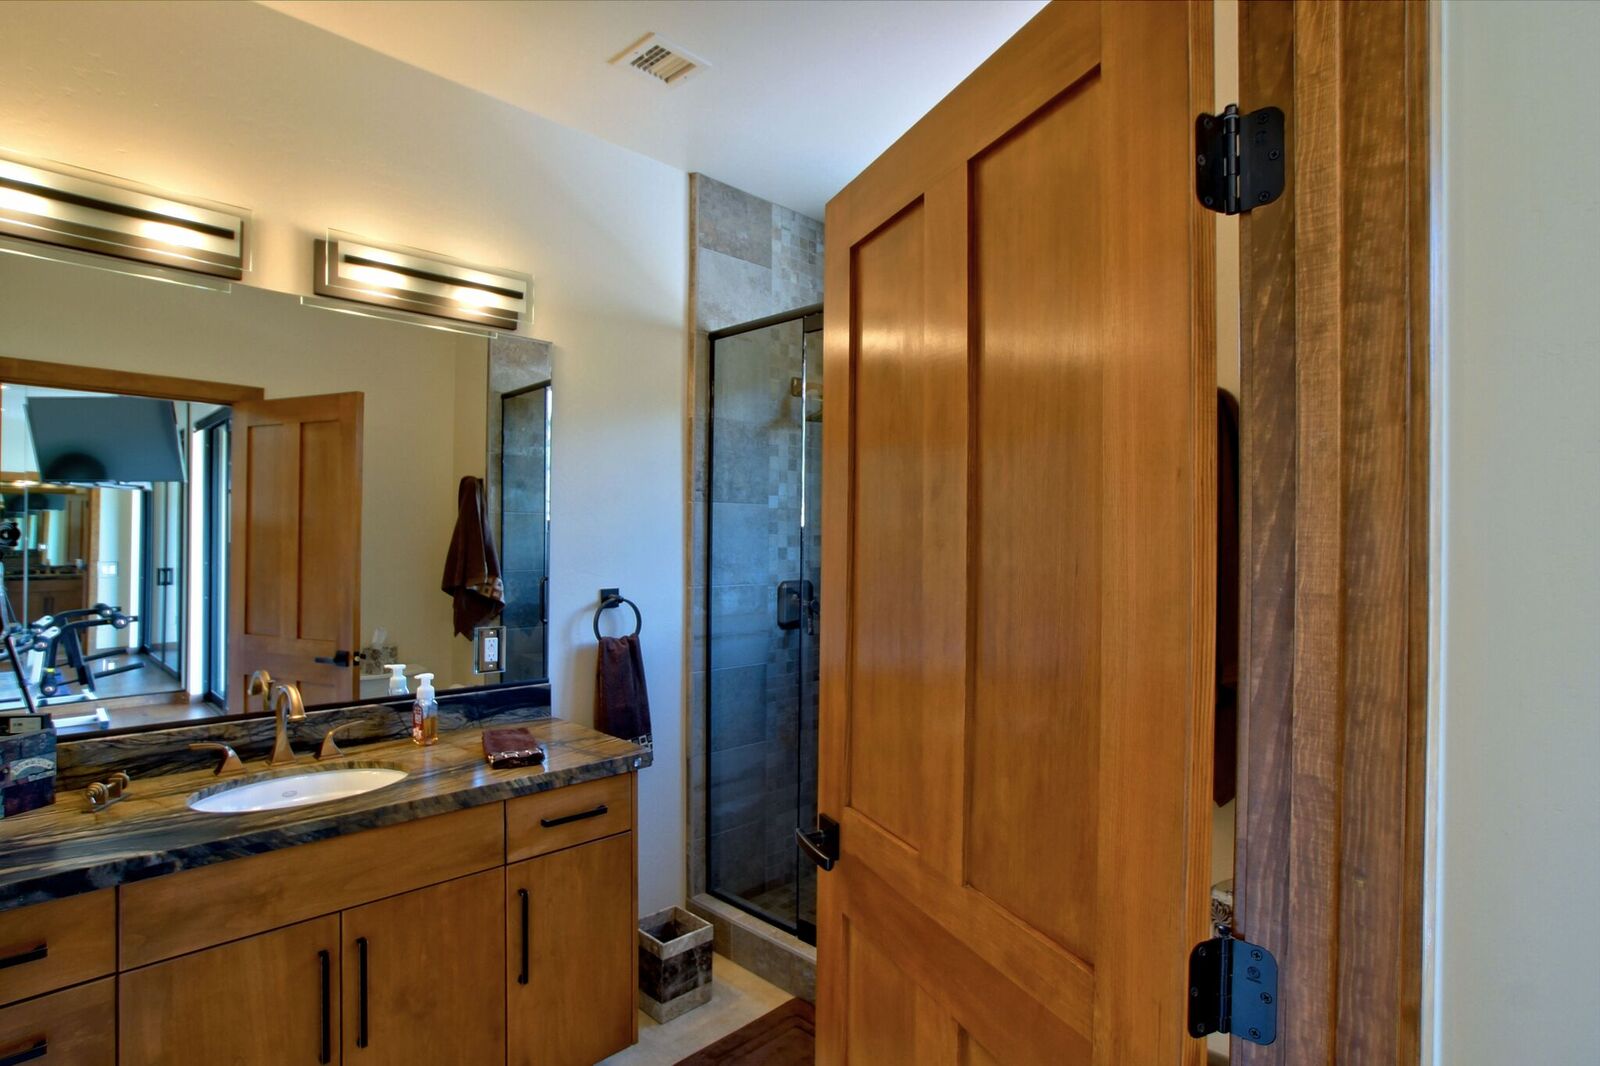 A bathroom with wooden cabinets and a large shower.